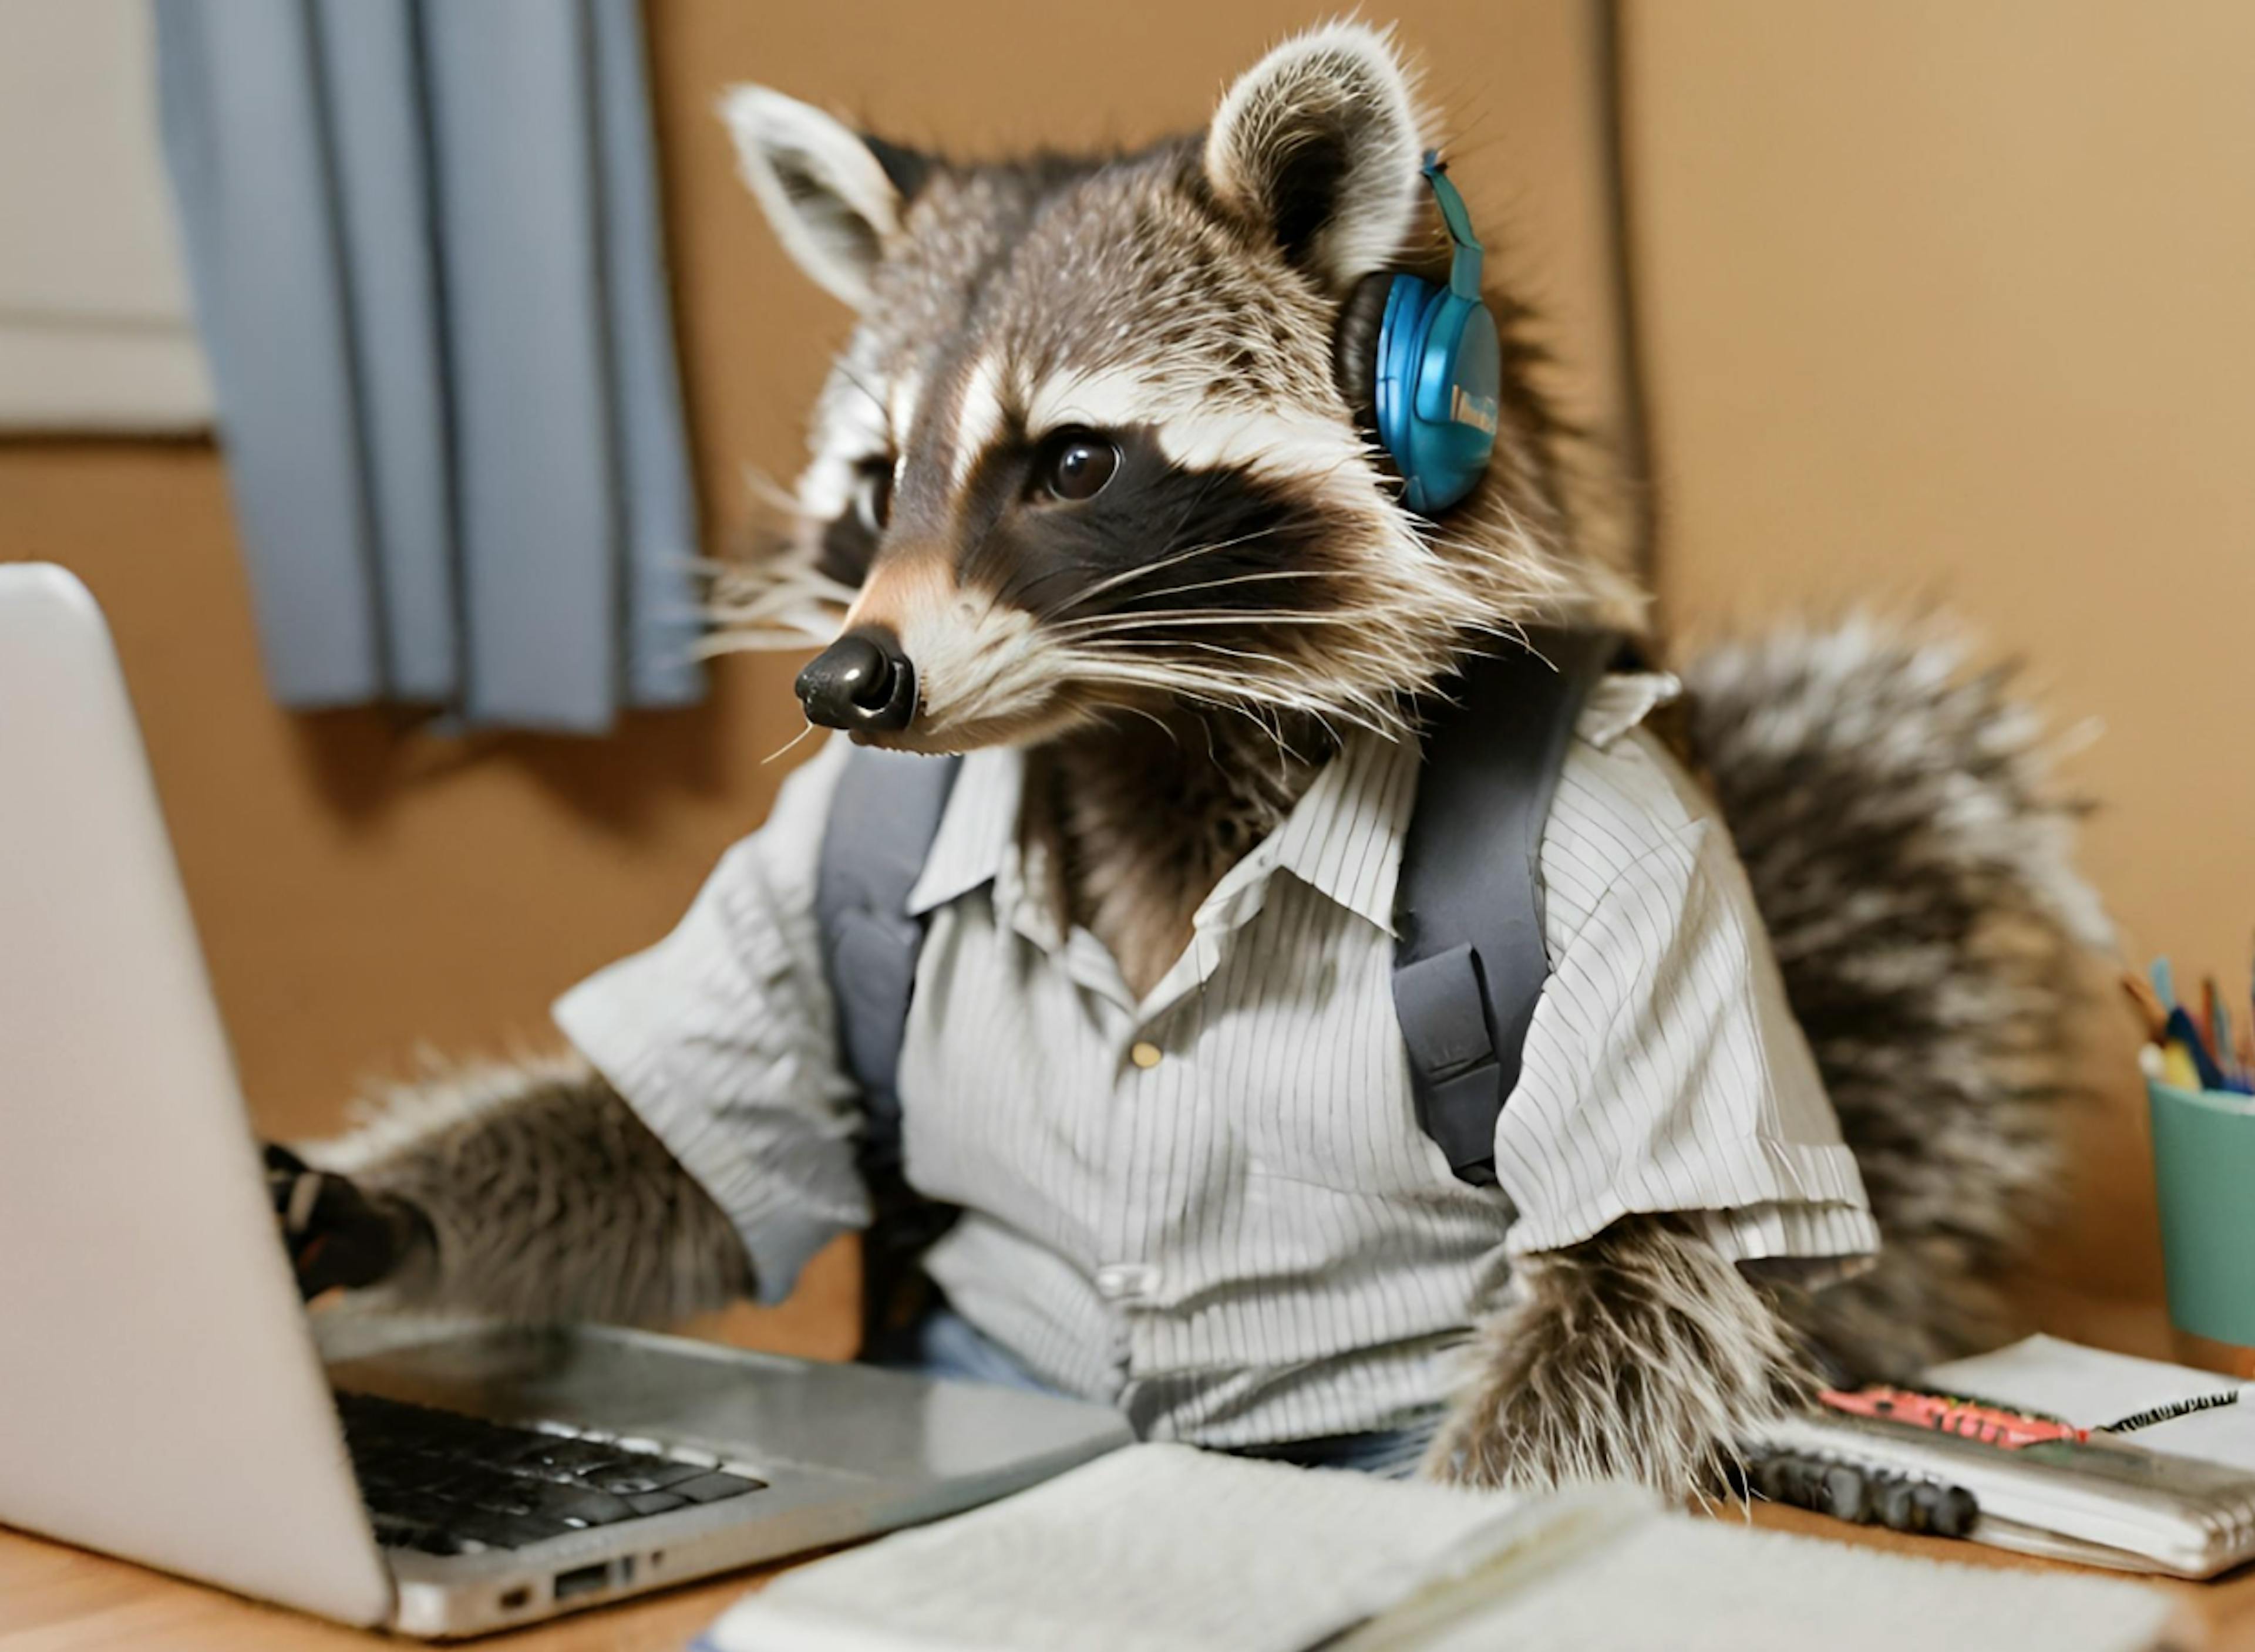 A raccoon sitting in front of a laptop with headphones on